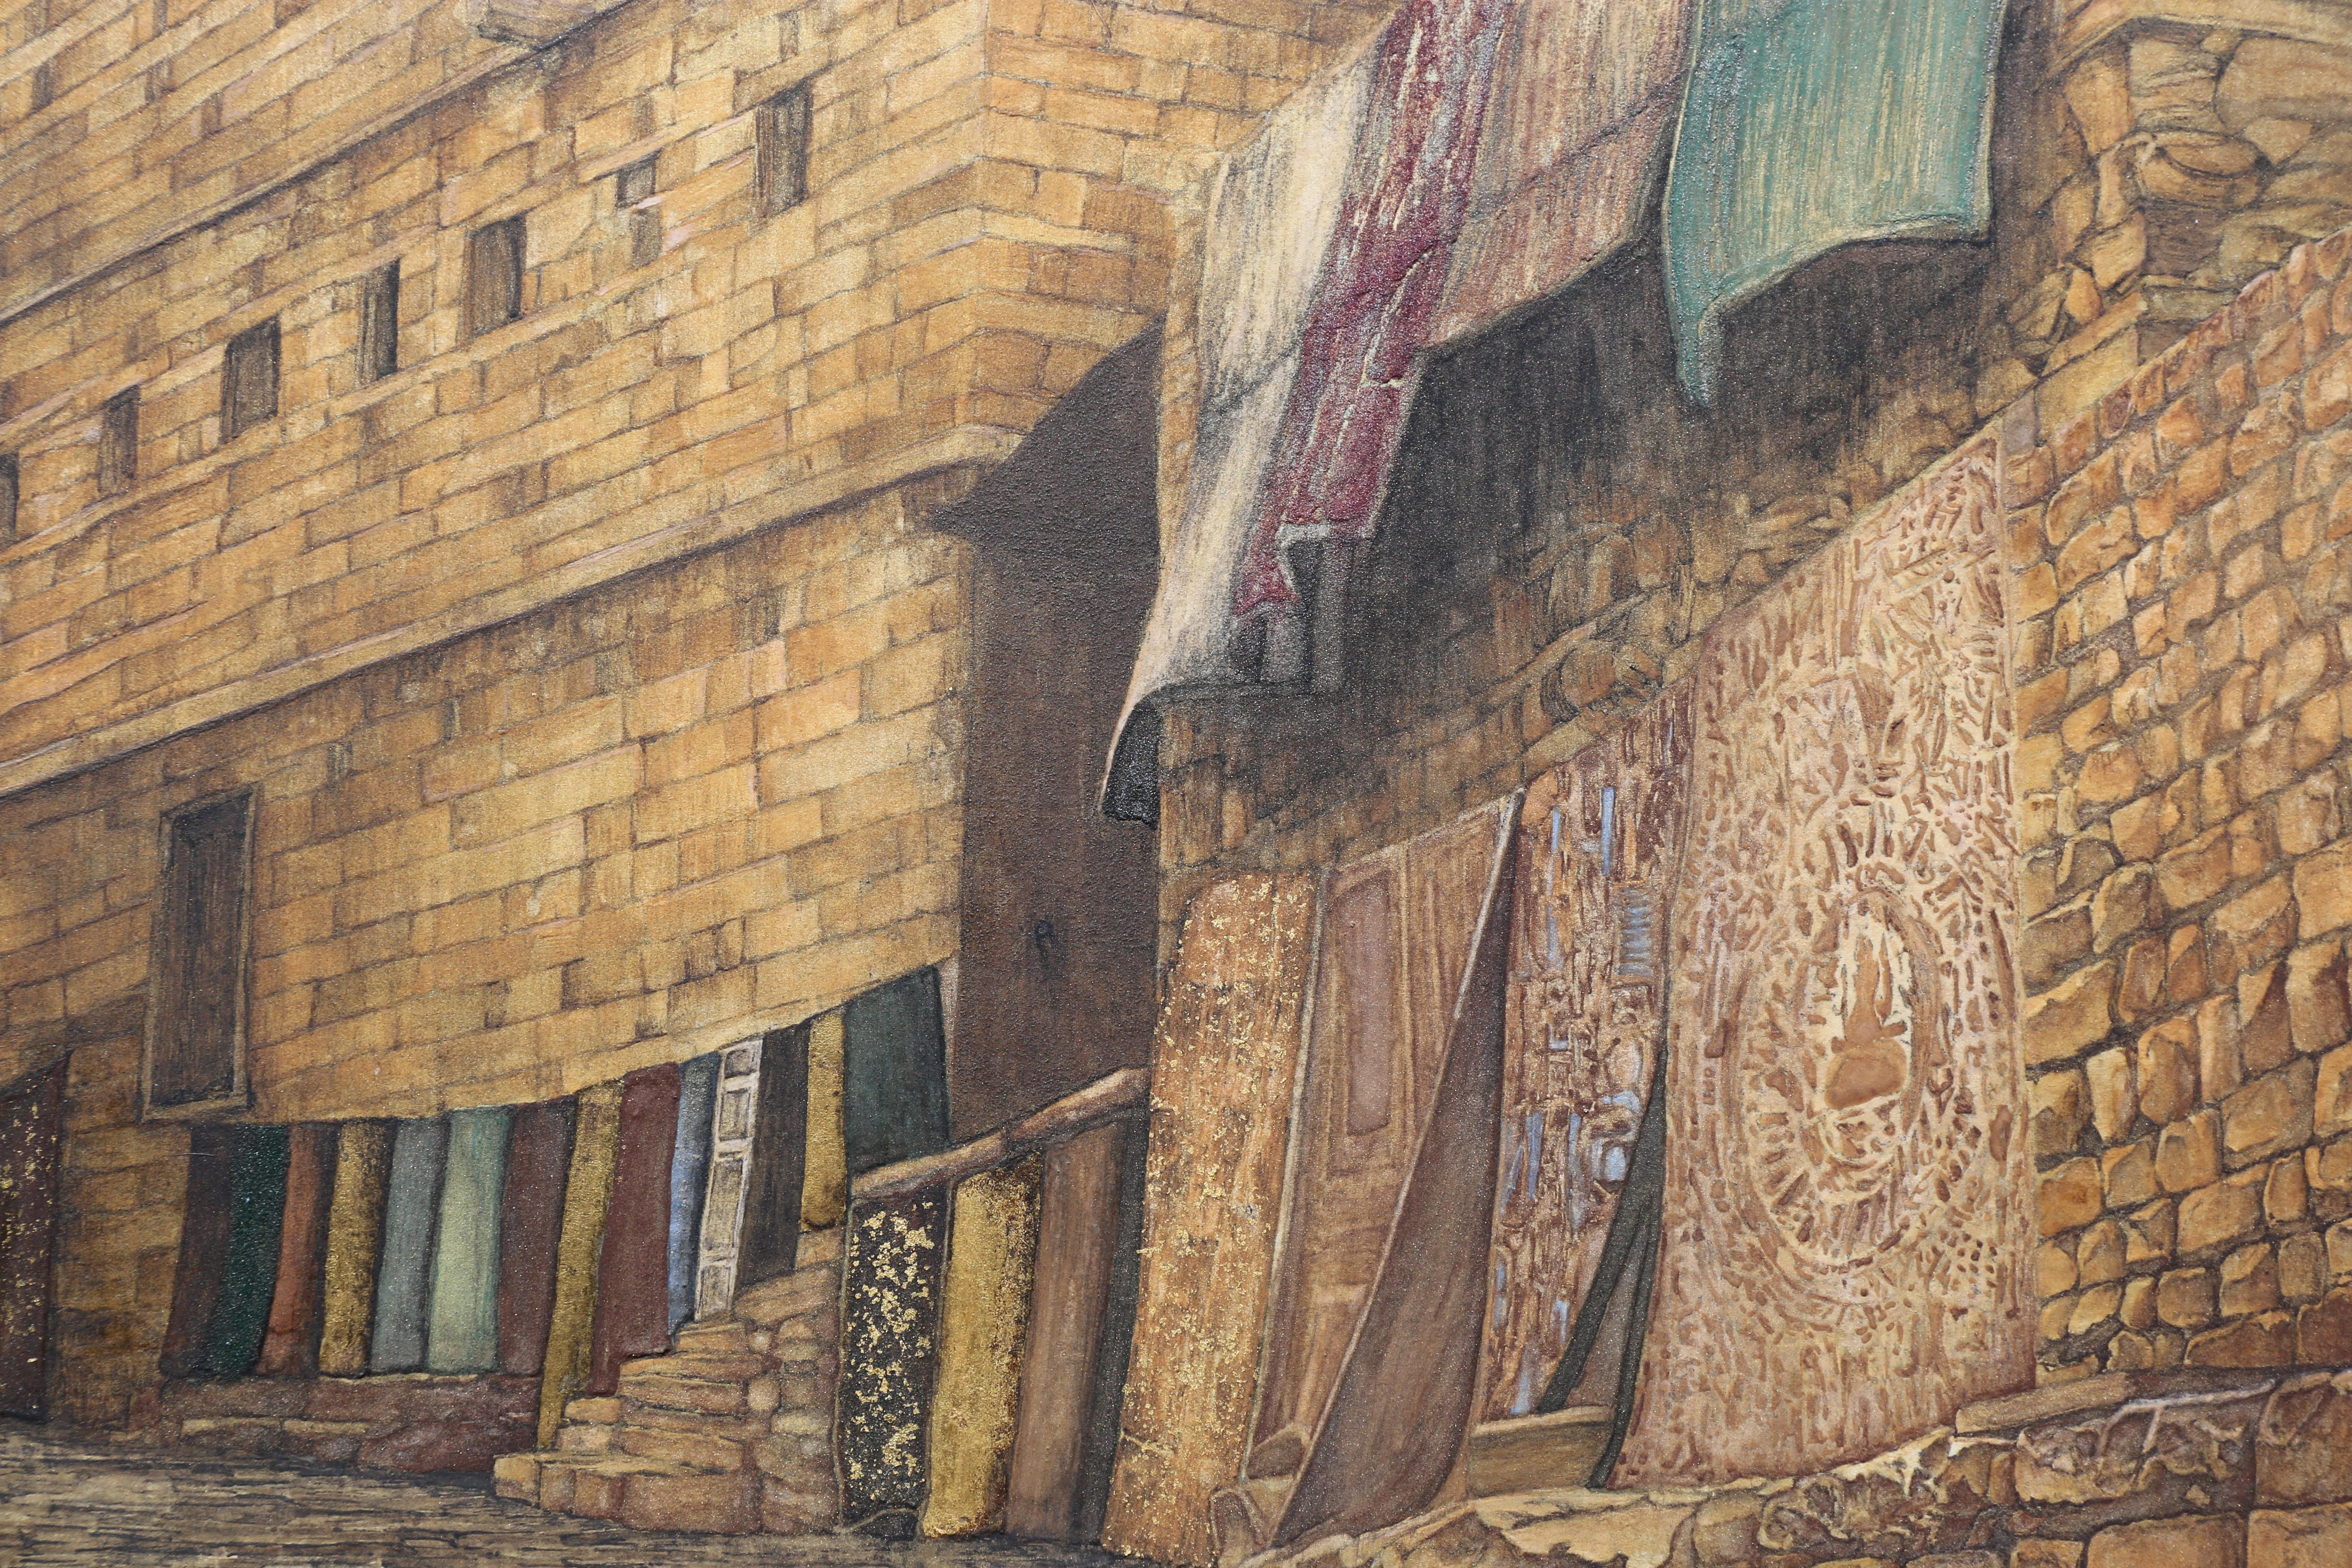 Street of Jaisalmer - Gold Leaf, Mineral and Ores Painting, Streetscape Realism For Sale 3